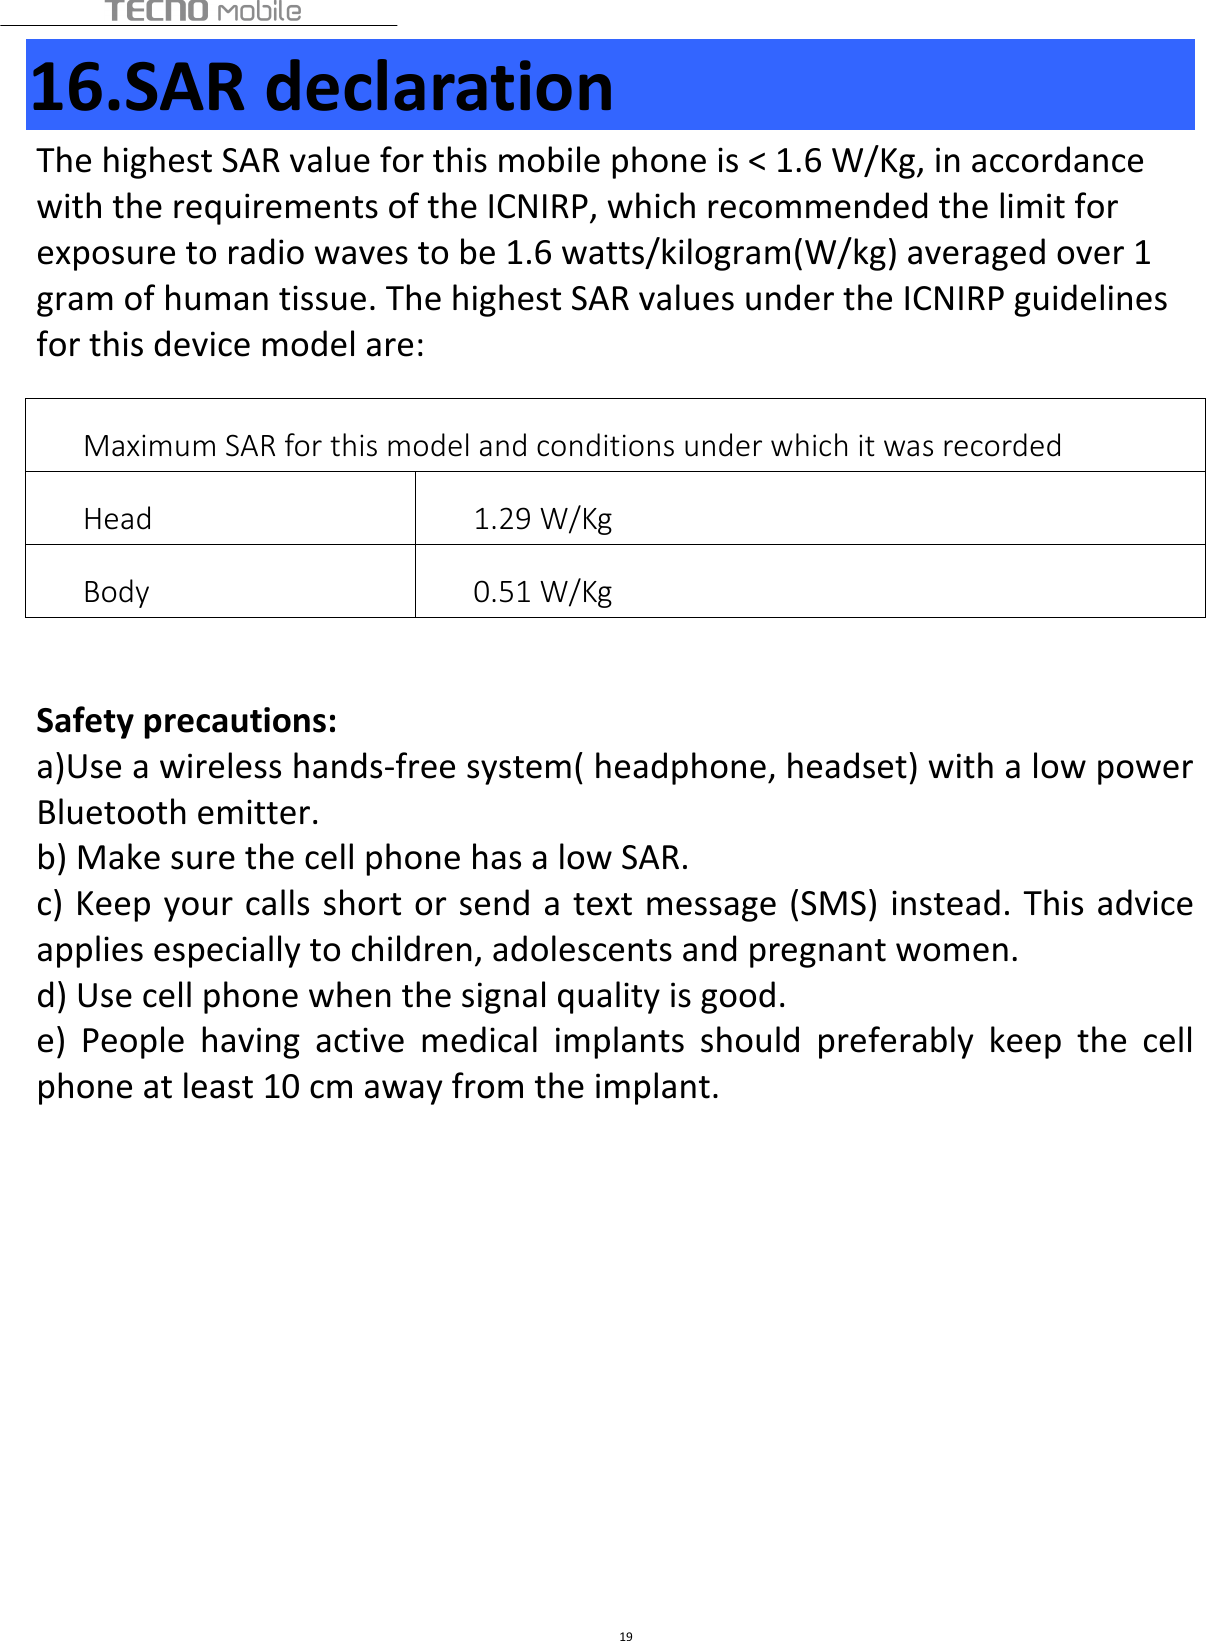  19 16.SAR declaration The highest SAR value for this mobile phone is &lt; 1.6 W/Kg, in accordance with the requirements of the ICNIRP, which recommended the limit for exposure to radio waves to be 1.6 watts/kilogram(W/kg) averaged over 1 gram of human tissue. The highest SAR values under the ICNIRP guidelines for this device model are:   Maximum SAR for this model and conditions under which it was recorded Head  1.29 W/Kg   Body  0.51 W/Kg    Safety precautions: a)Use a wireless hands-free system( headphone, headset) with a low power Bluetooth emitter. b) Make sure the cell phone has a low SAR. c) Keep your calls short or send a text message (SMS) instead. This advice applies especially to children, adolescents and pregnant women. d) Use cell phone when the signal quality is good. e)  People  having  active  medical  implants  should  preferably  keep  the  cell phone at least 10 cm away from the implant.         